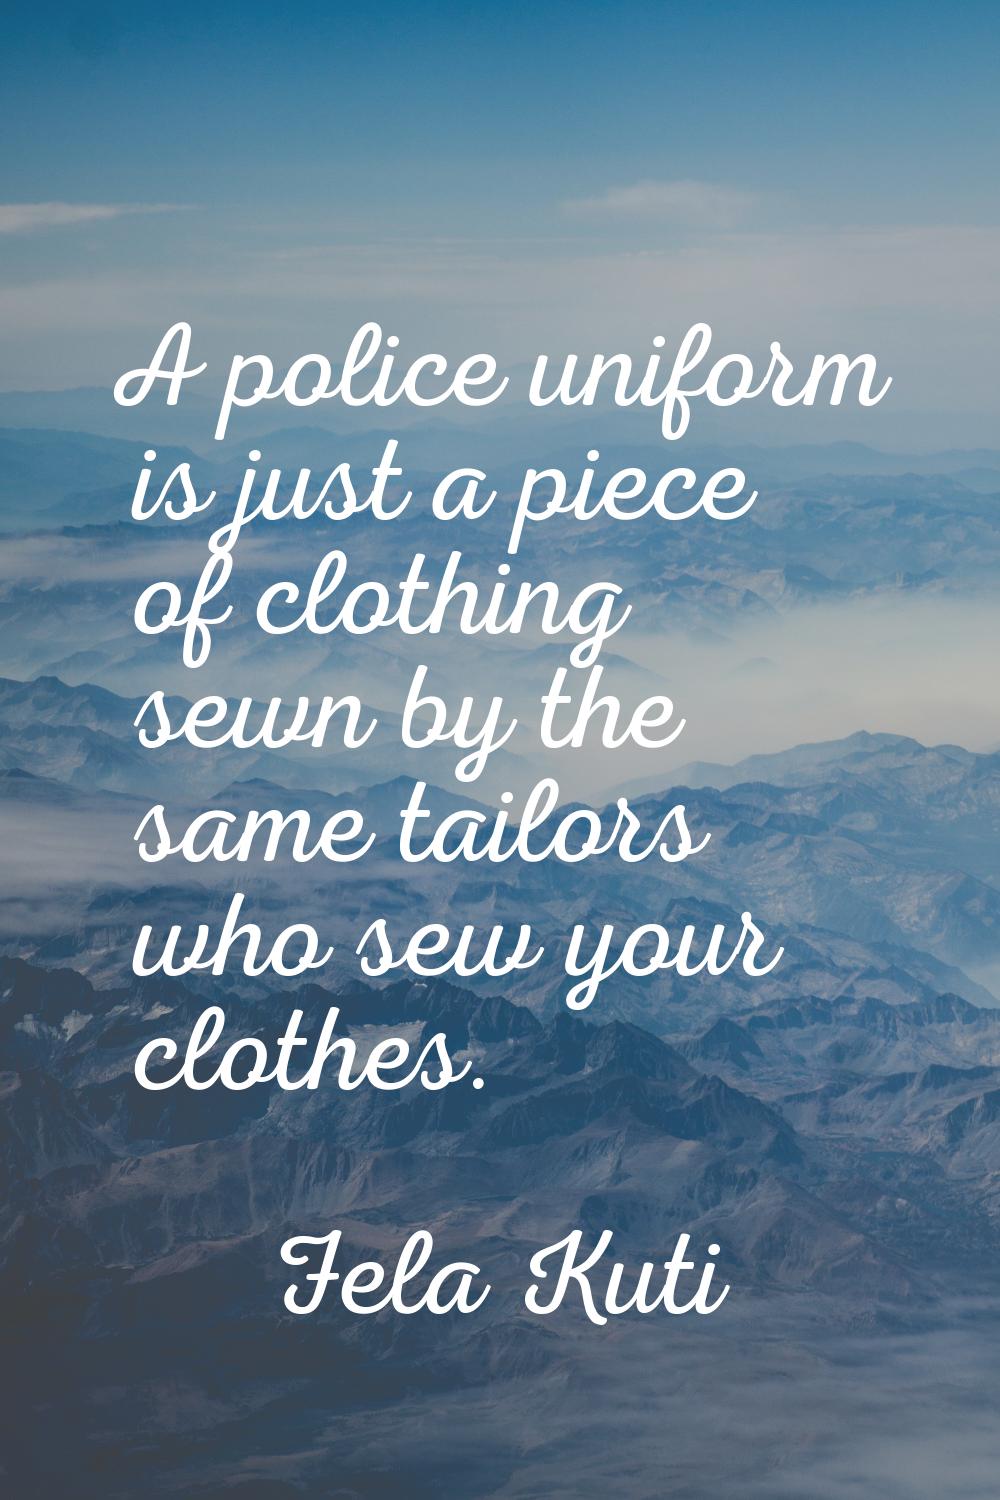 A police uniform is just a piece of clothing sewn by the same tailors who sew your clothes.